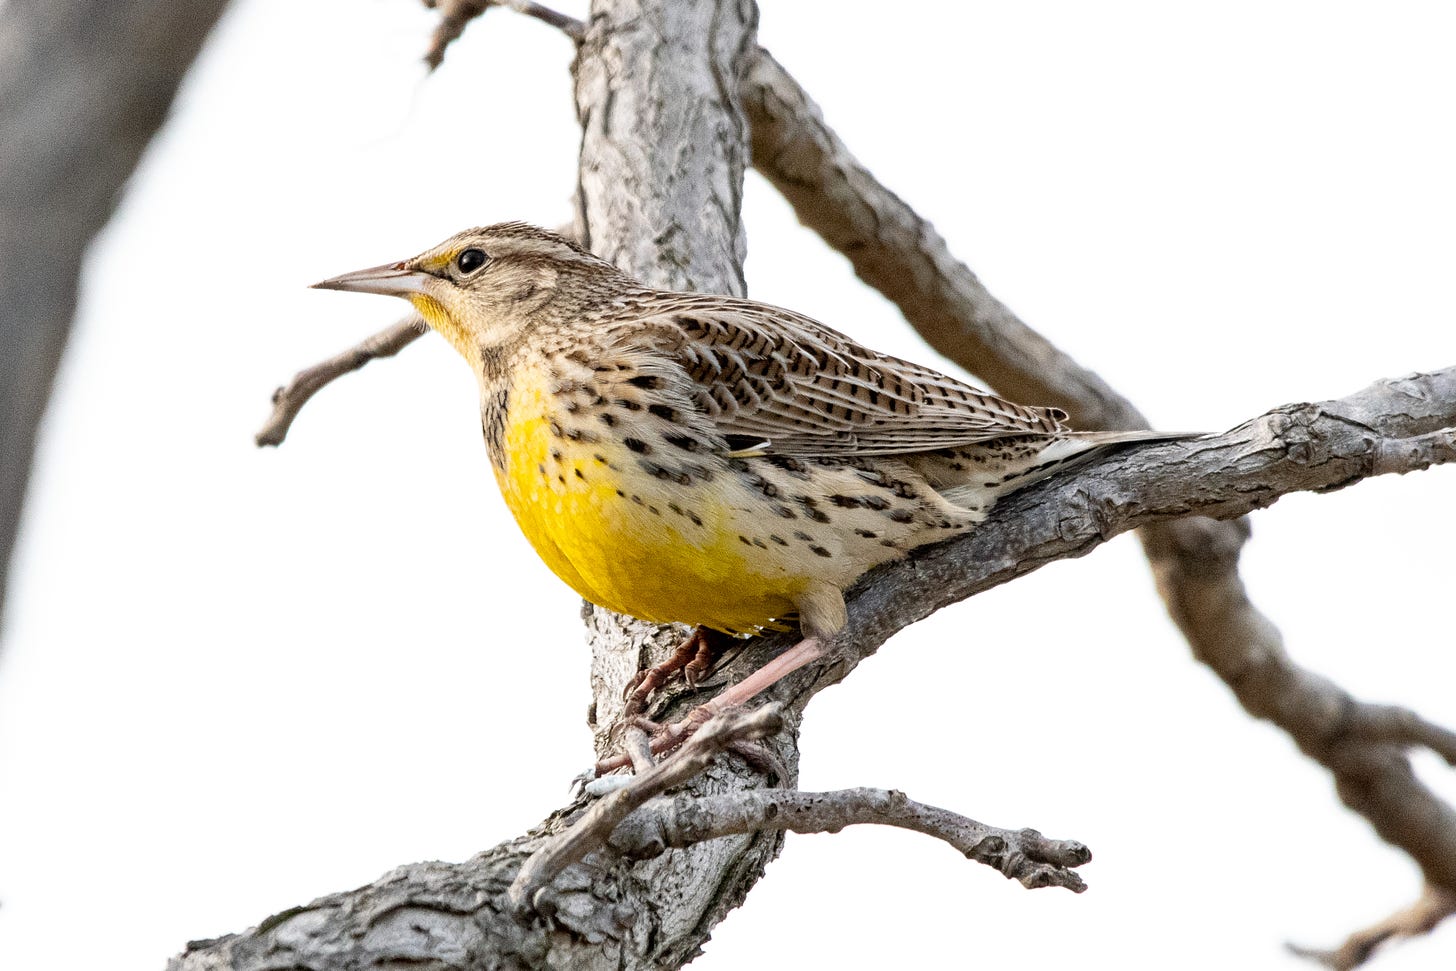 A Western meadowlark in a tree, its bright yellow throat and breast catching the morning sun